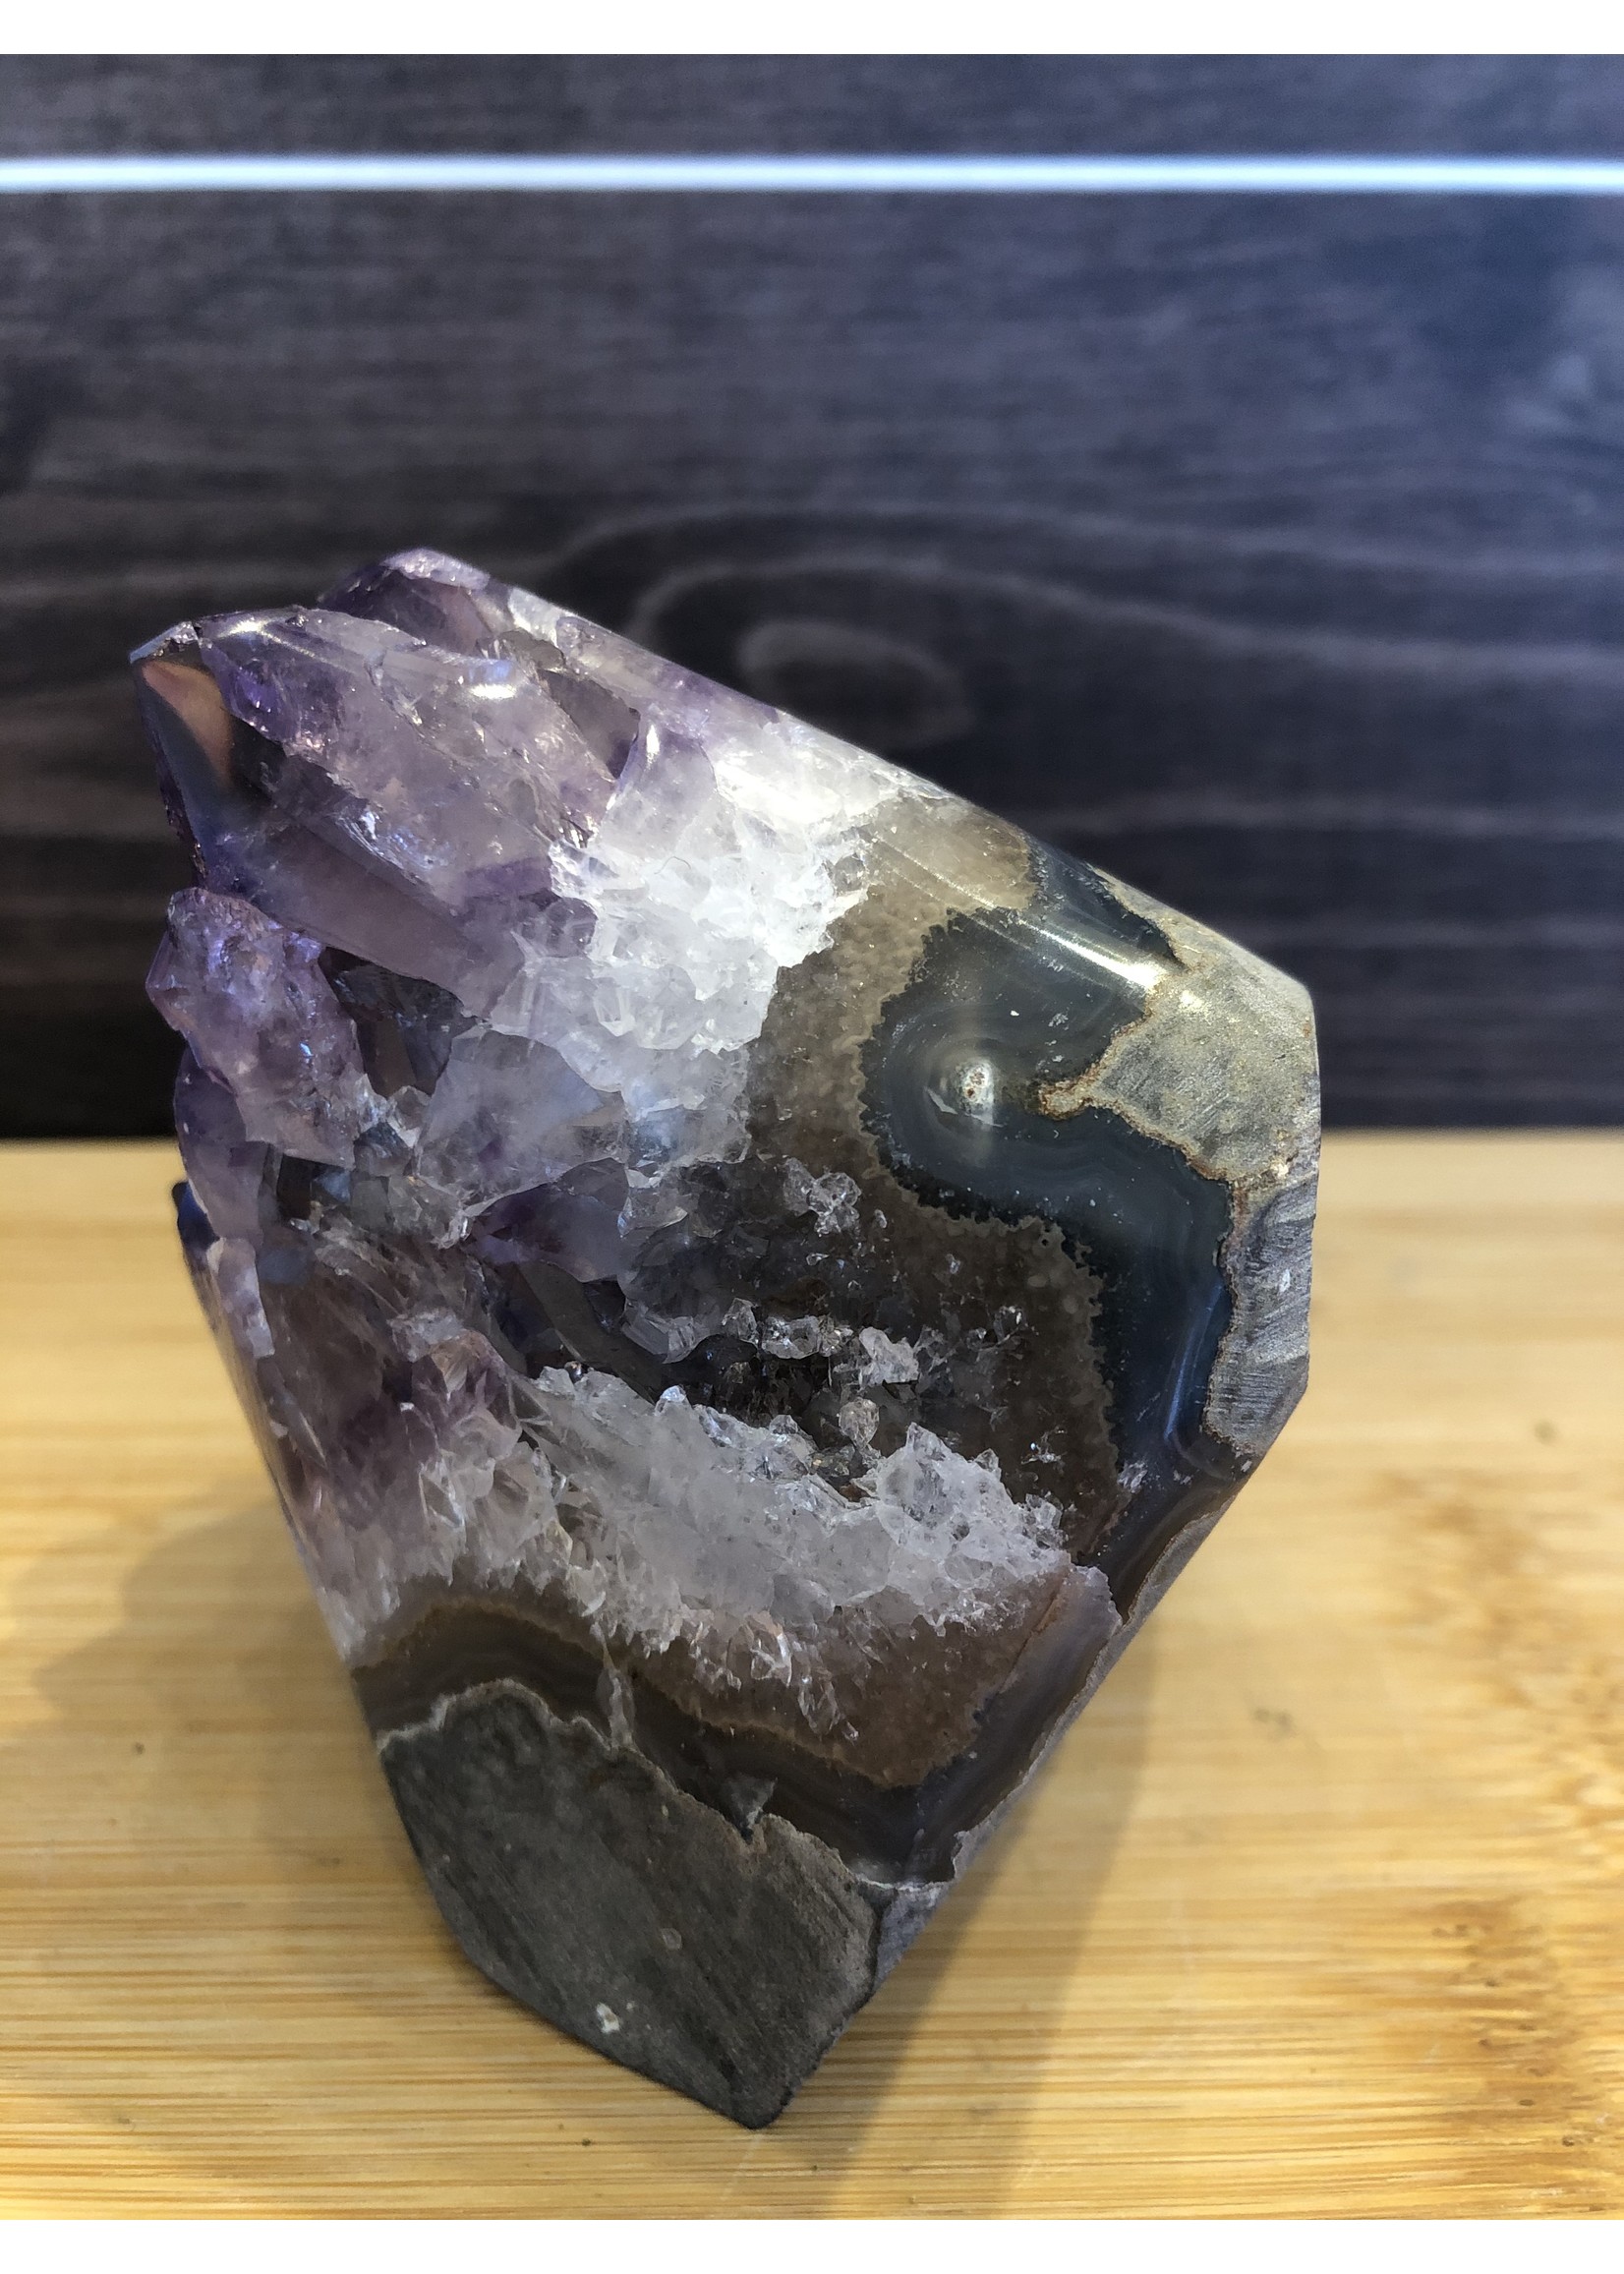 majestic amethyst free form, promotes spiritual upliftment, concentration and meditation